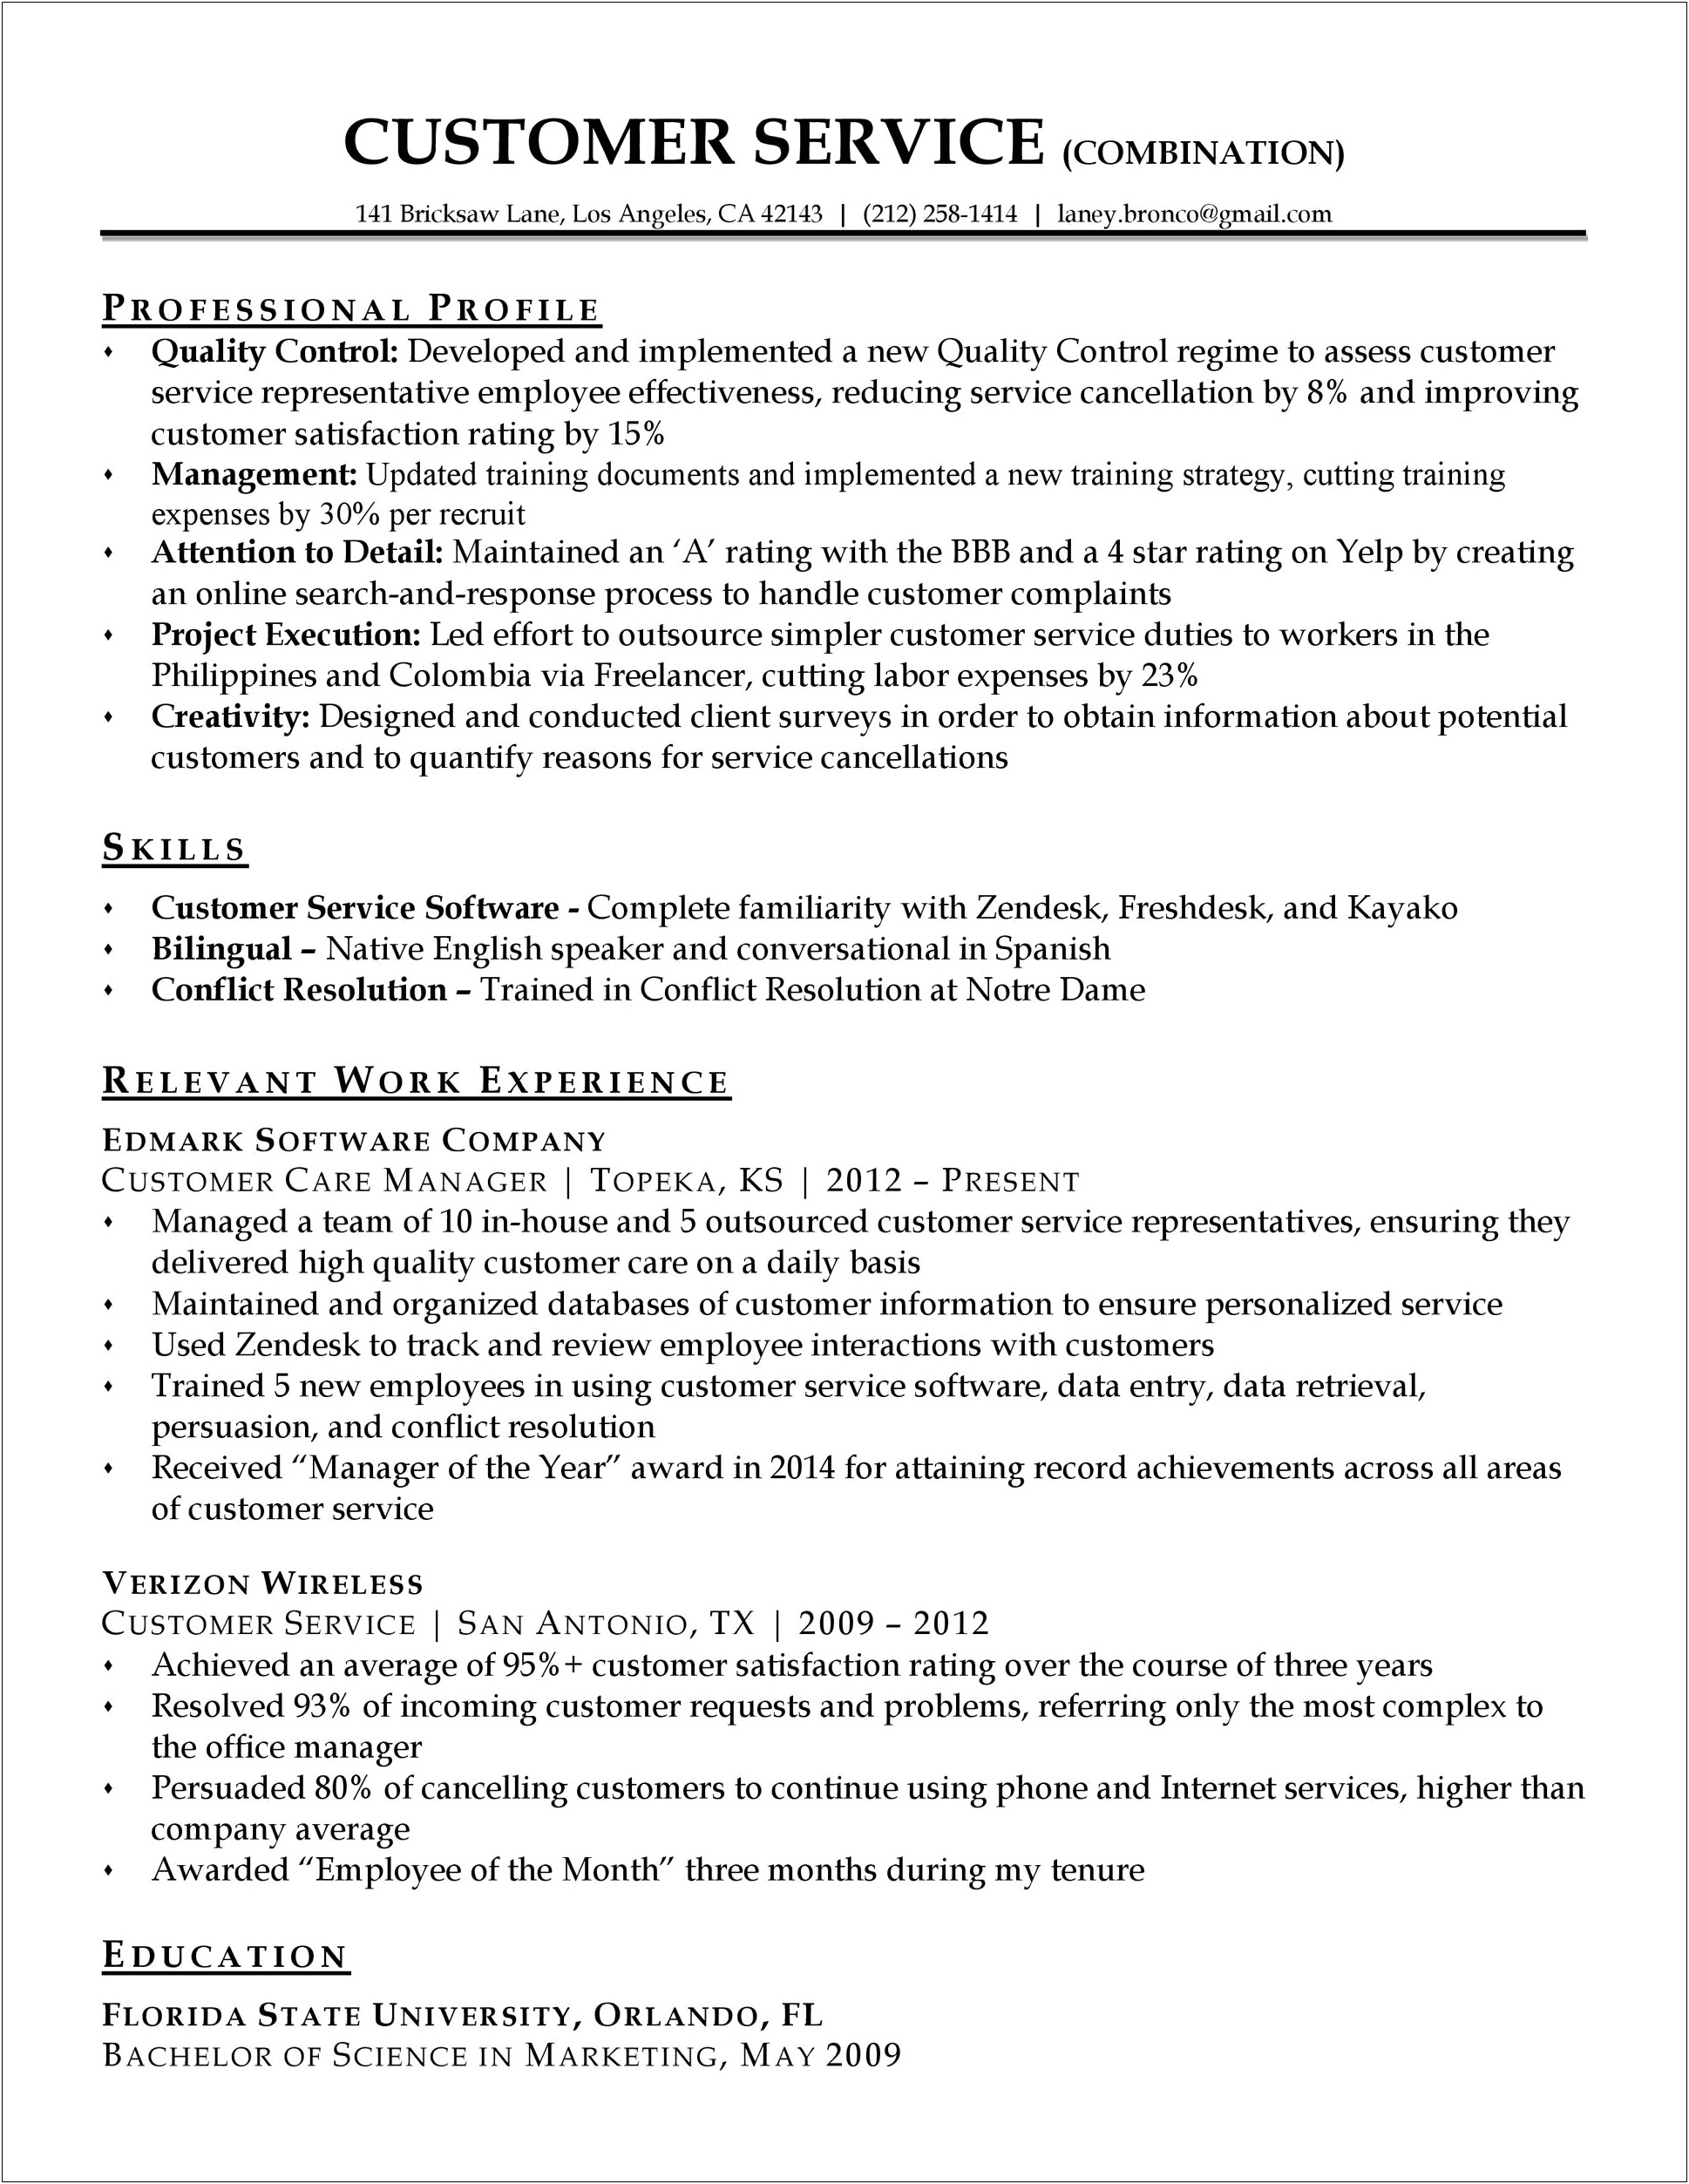 Free Resume Objective Samples For Customer Service